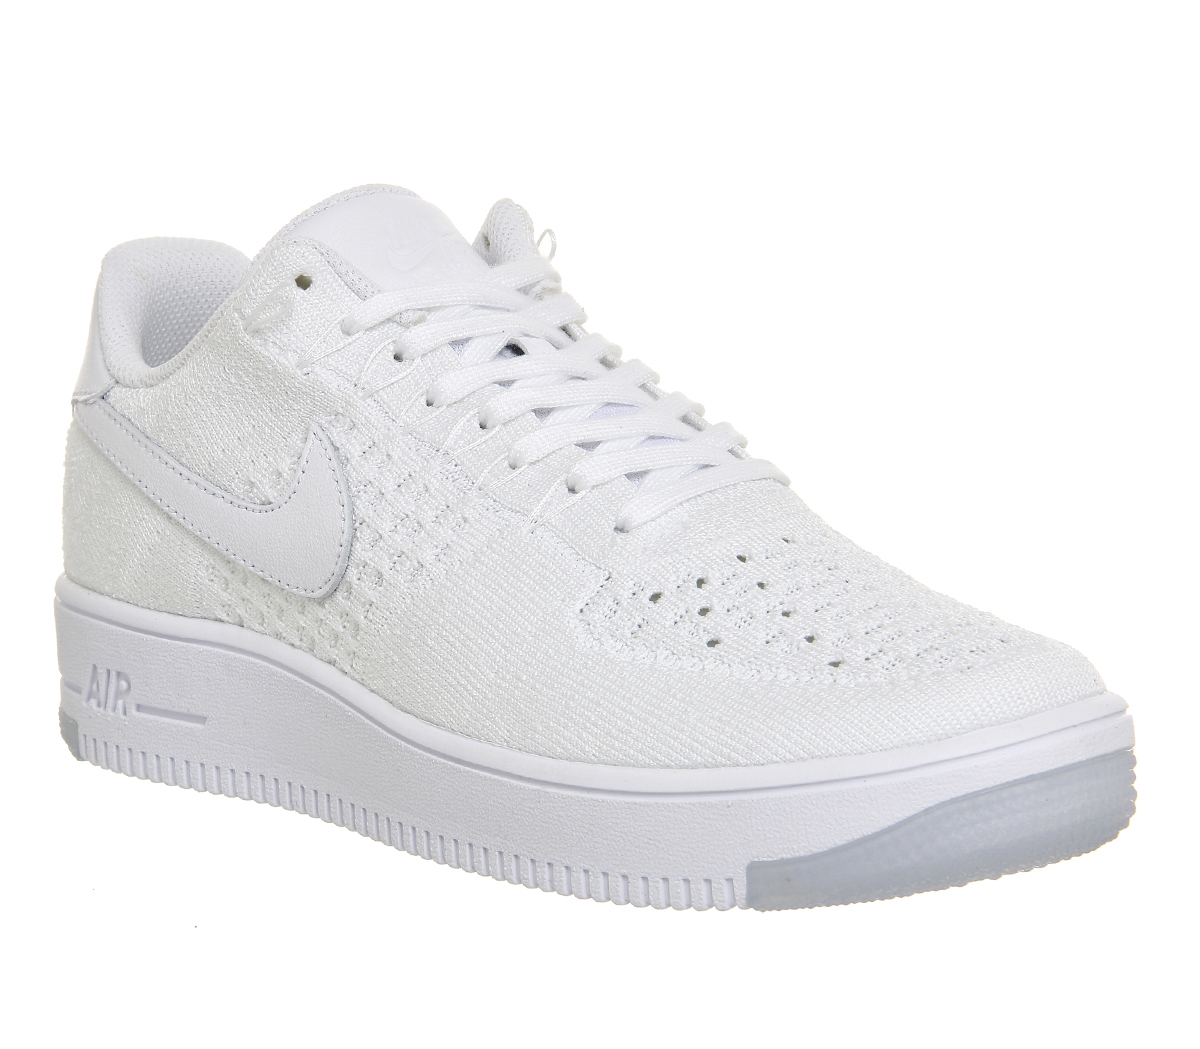 Nike Air Force 1 Low Flyknit White 